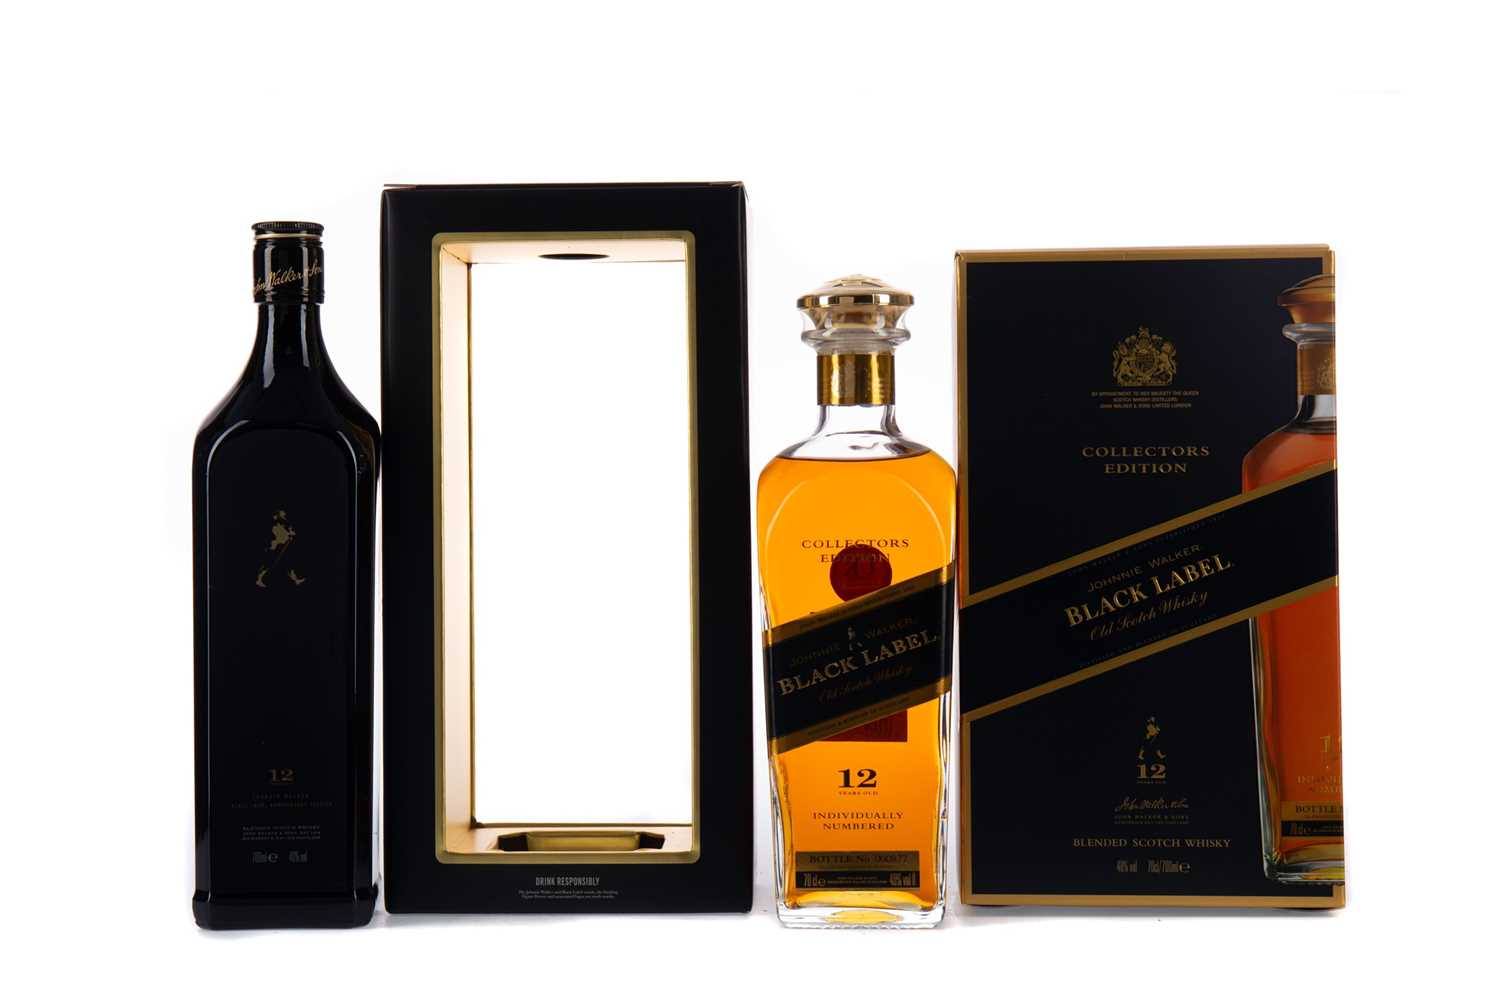 Lot 48 - JOHNNIE WALKER BLACK LABEL COLLECTORS EDITION, AND ANNIVERSARY EDITION